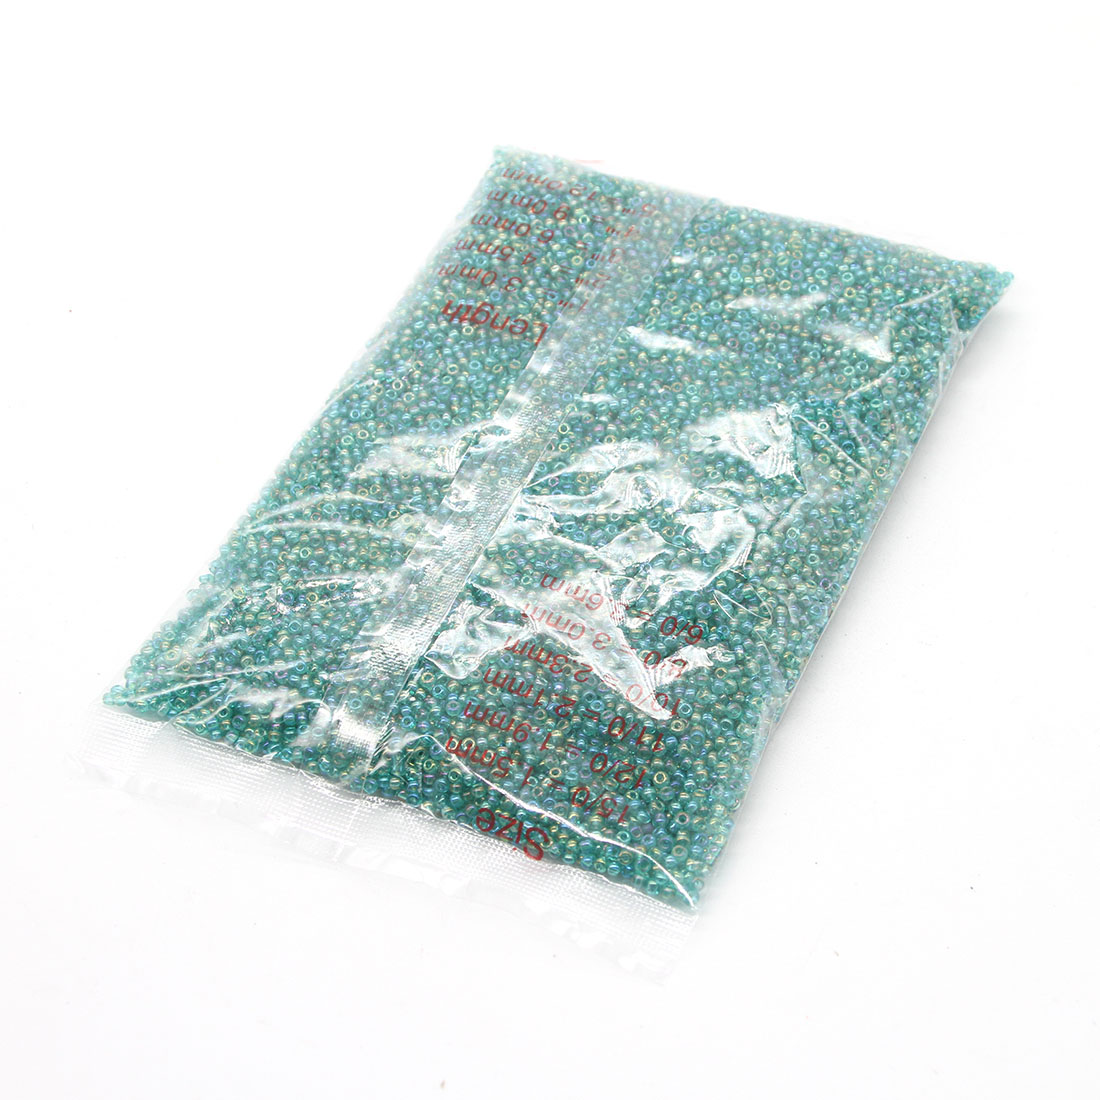 Turquoise 4mm packs of 4500